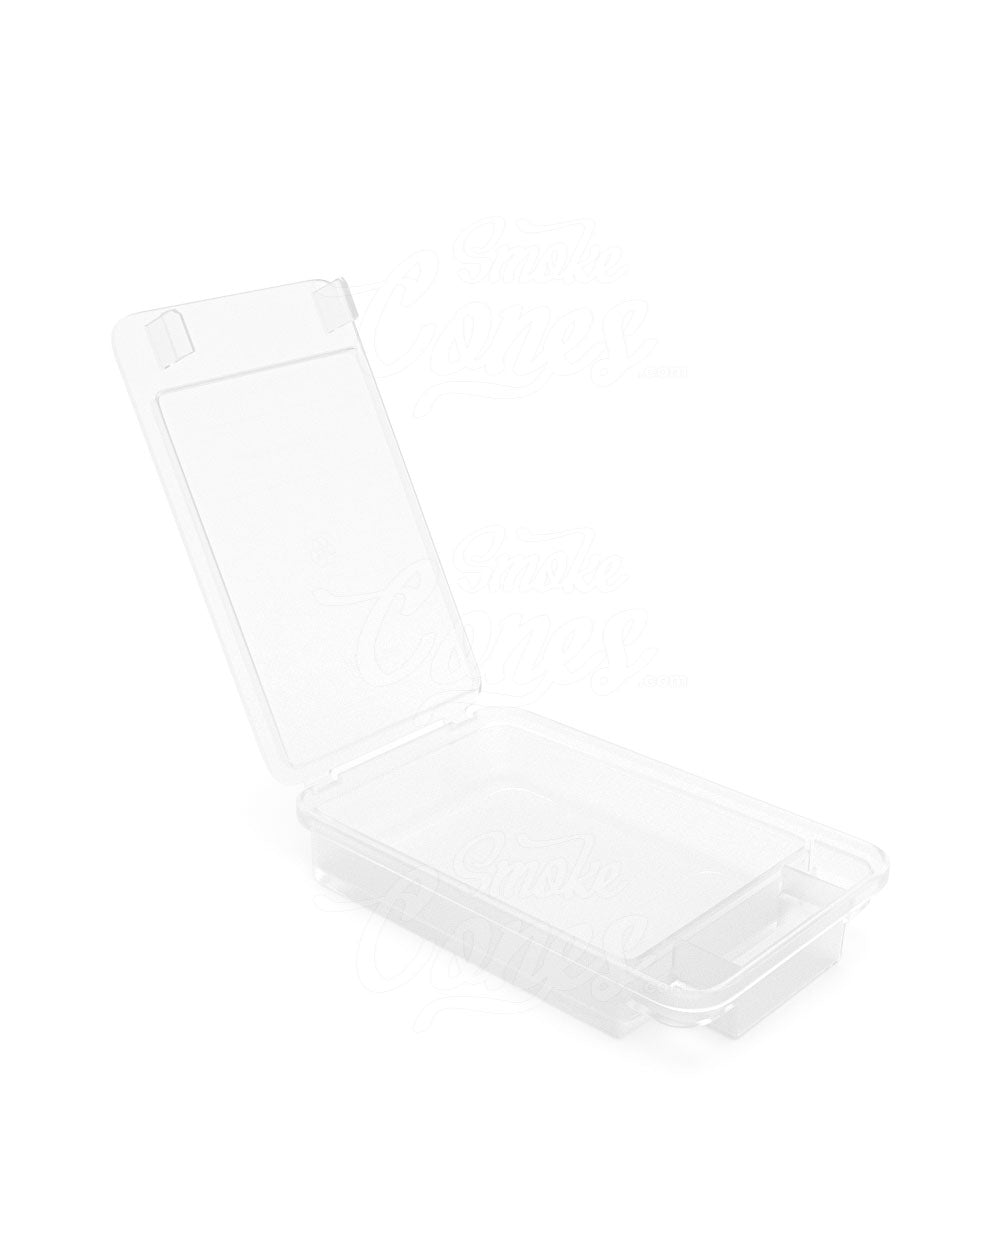 84mm Pollen Gear Clear SnapTech Child Resistant Edible & Pre-Roll Medium Joint Case 240/Box - 1